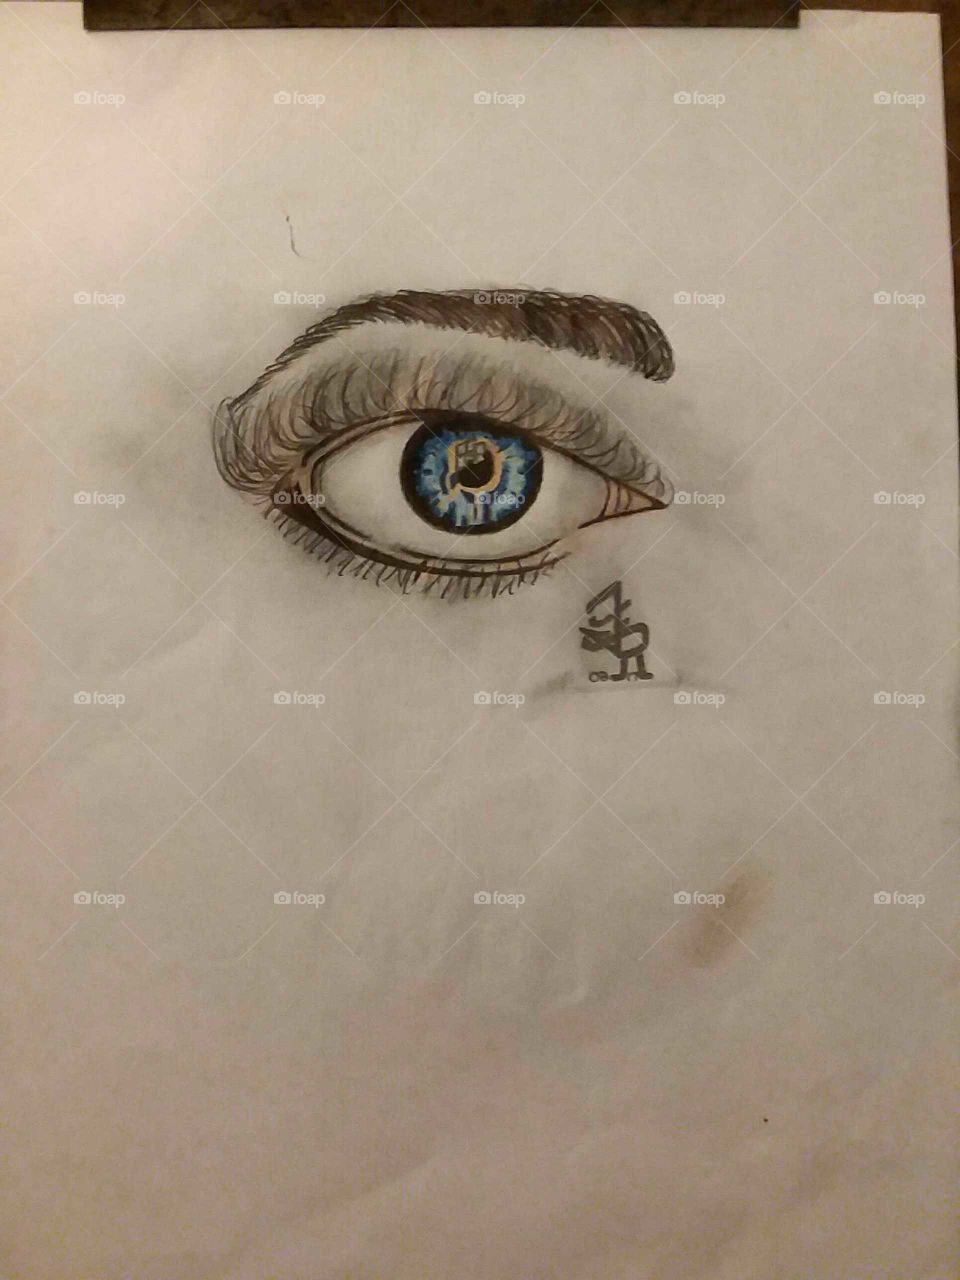 My Pencil Sketches; The Eye